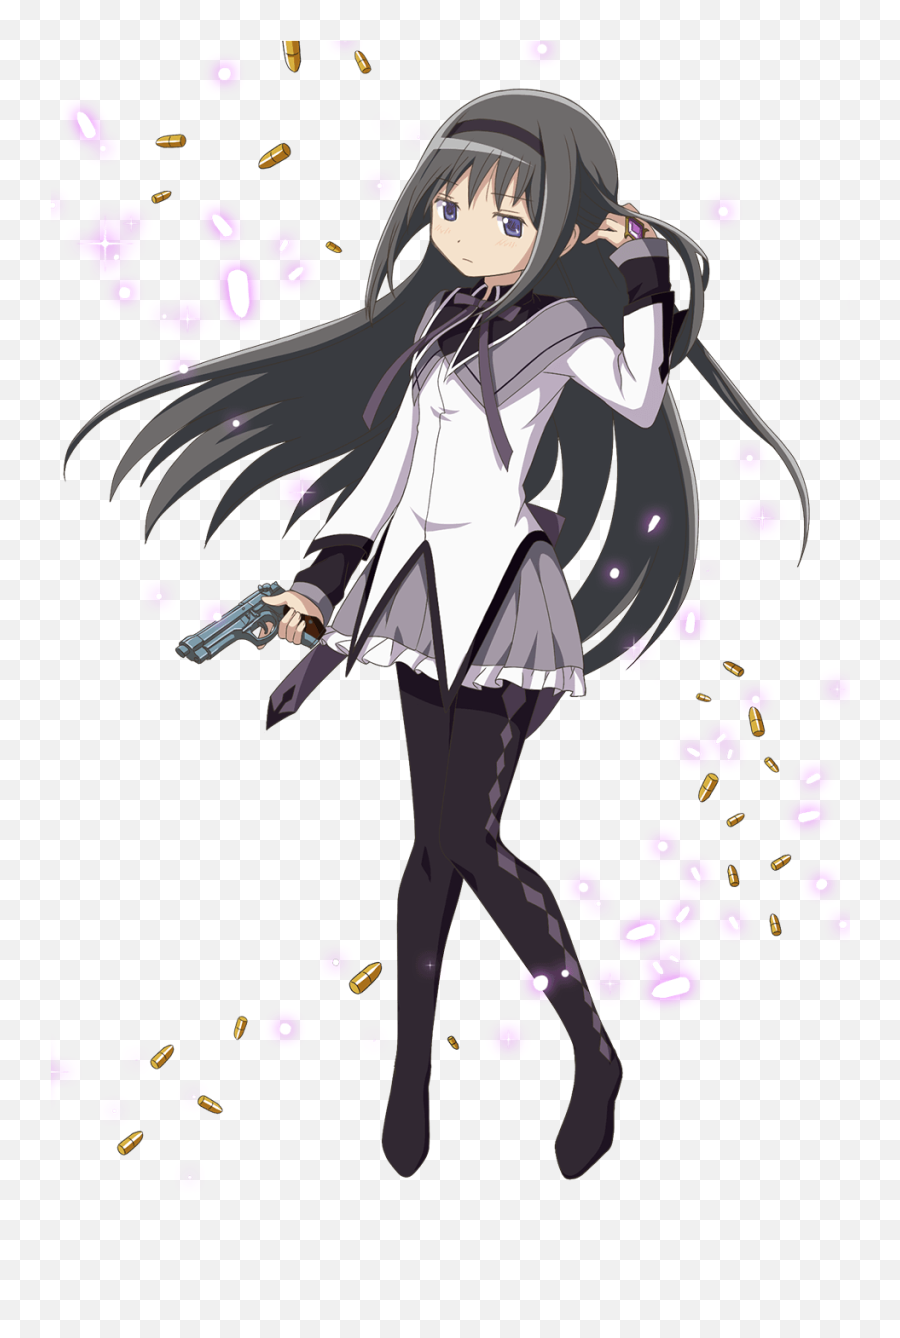 Vote For Homura As Best Character On The Anime Bracket - Ashley Taylor Magia Record Emoji,Lewd Emojis